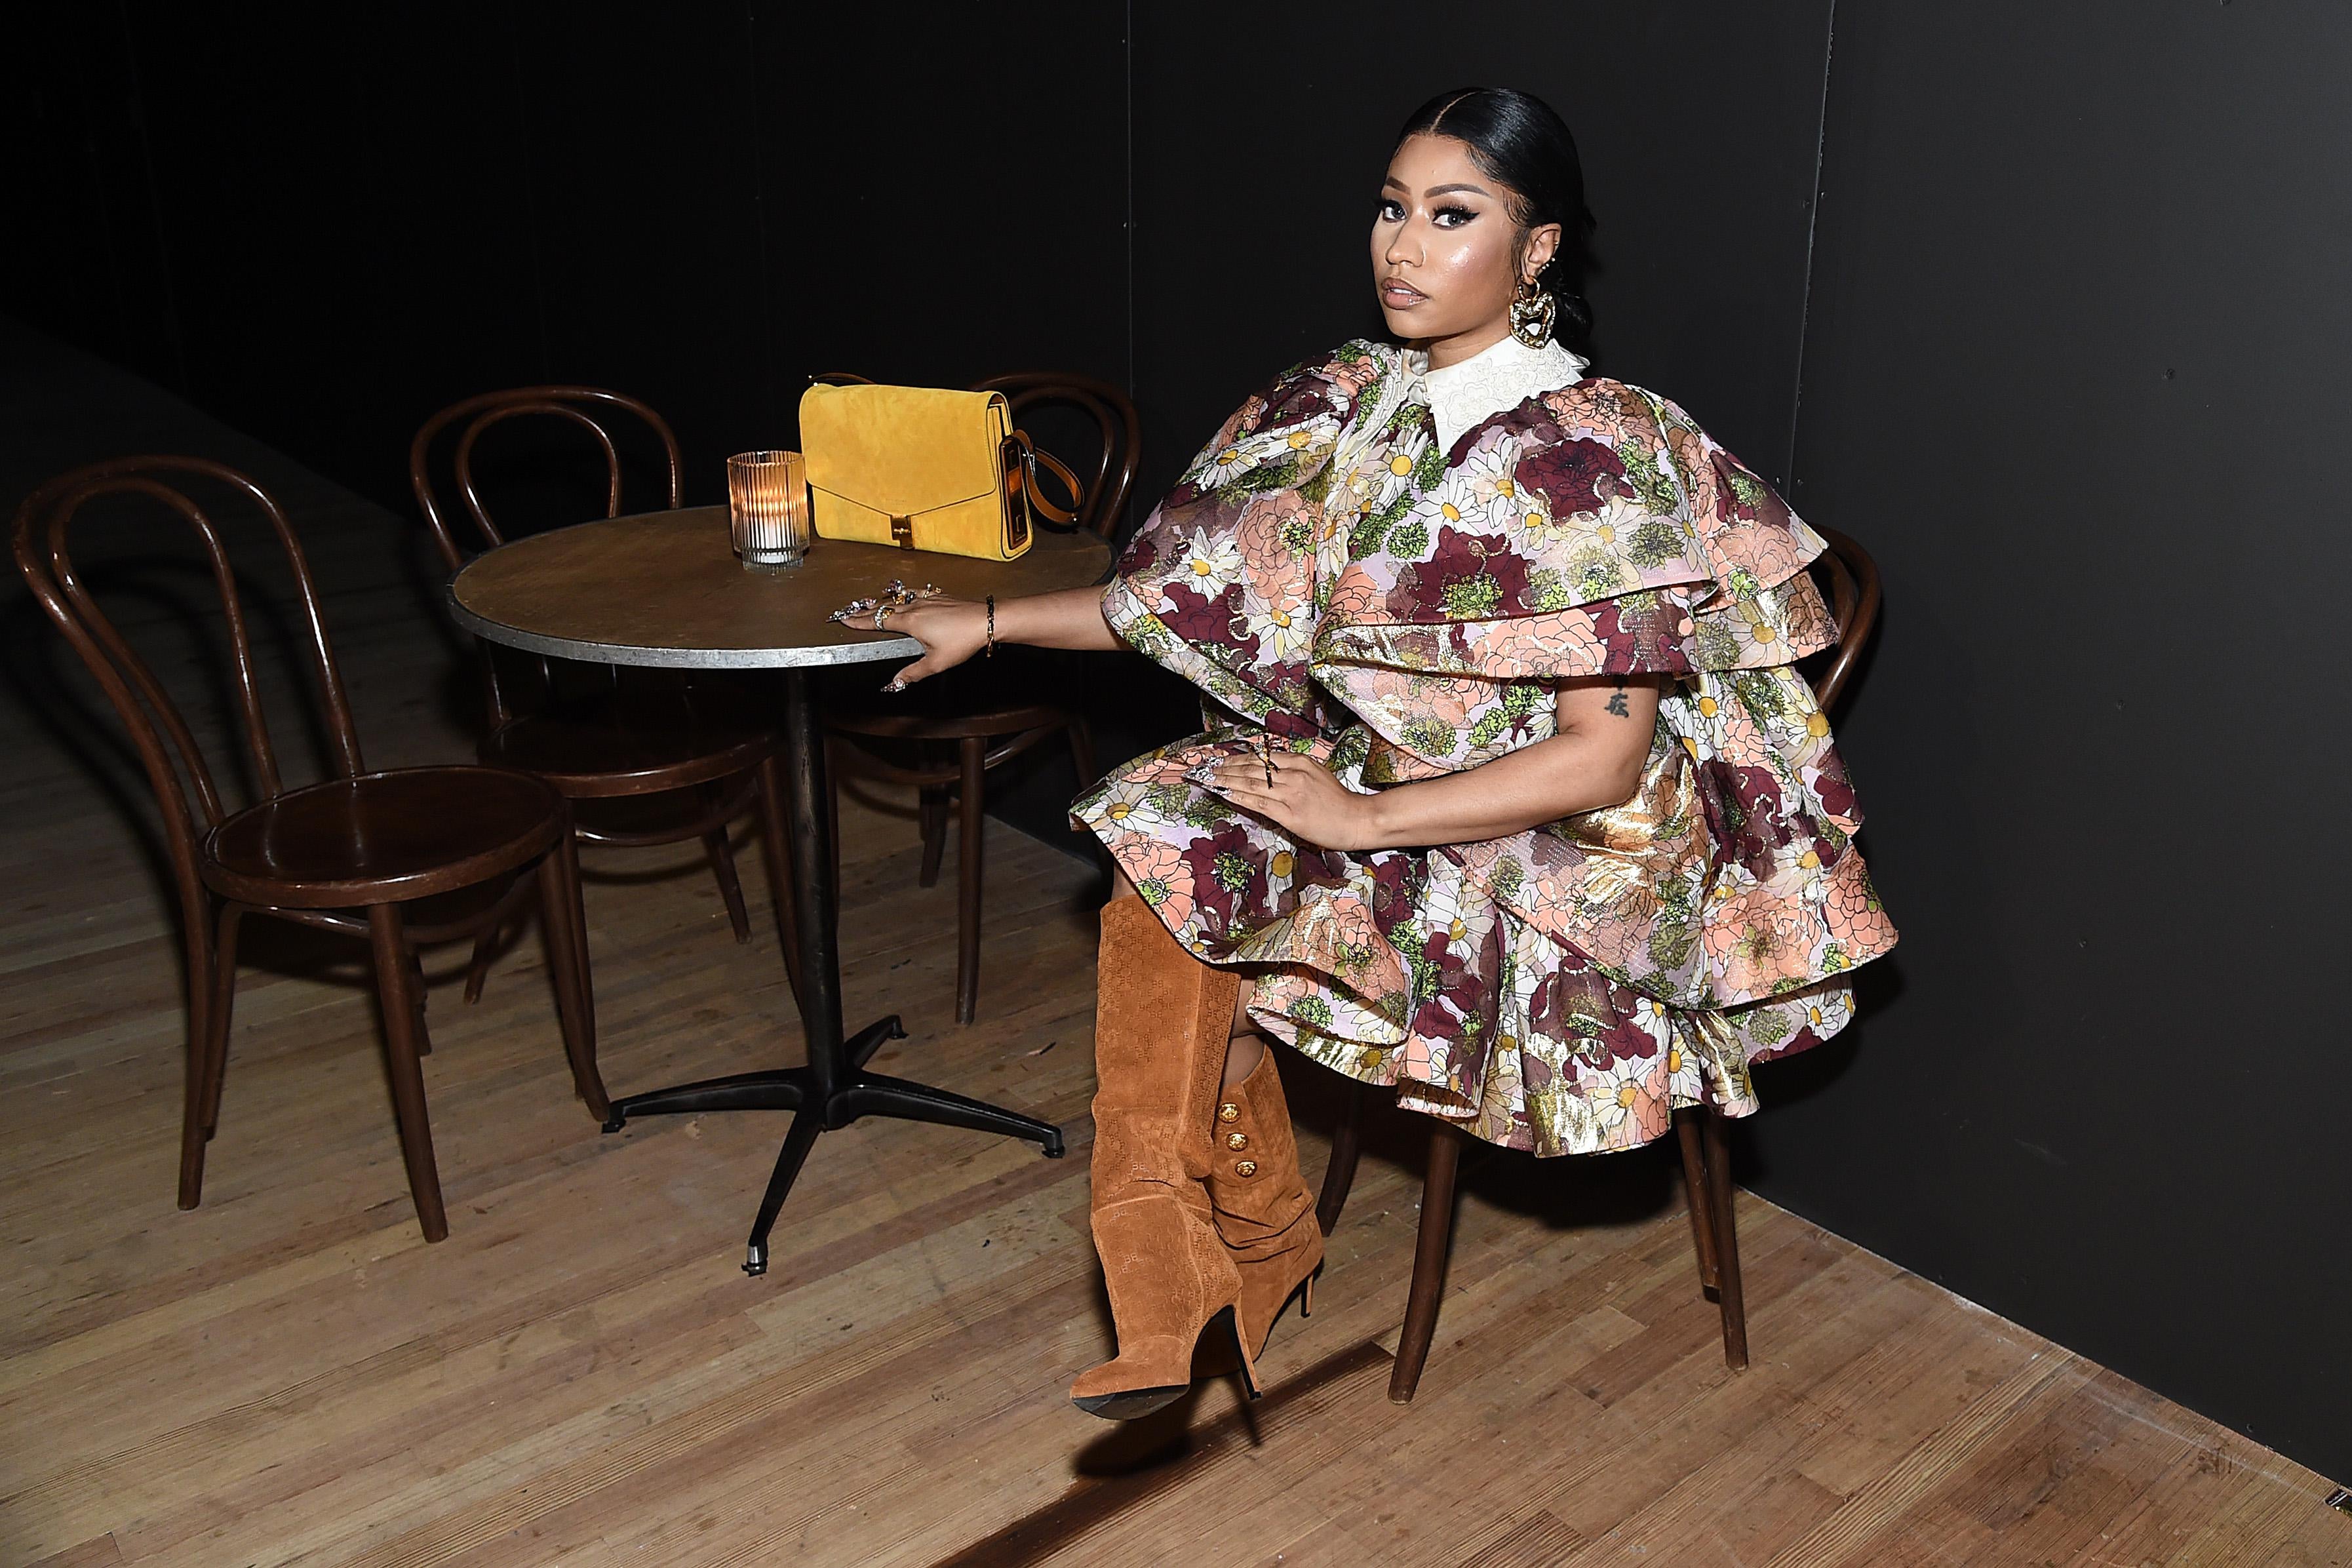 Nicki Minaj, in an elaborate dress and boots, sits at a table that holds a purse and a candle.